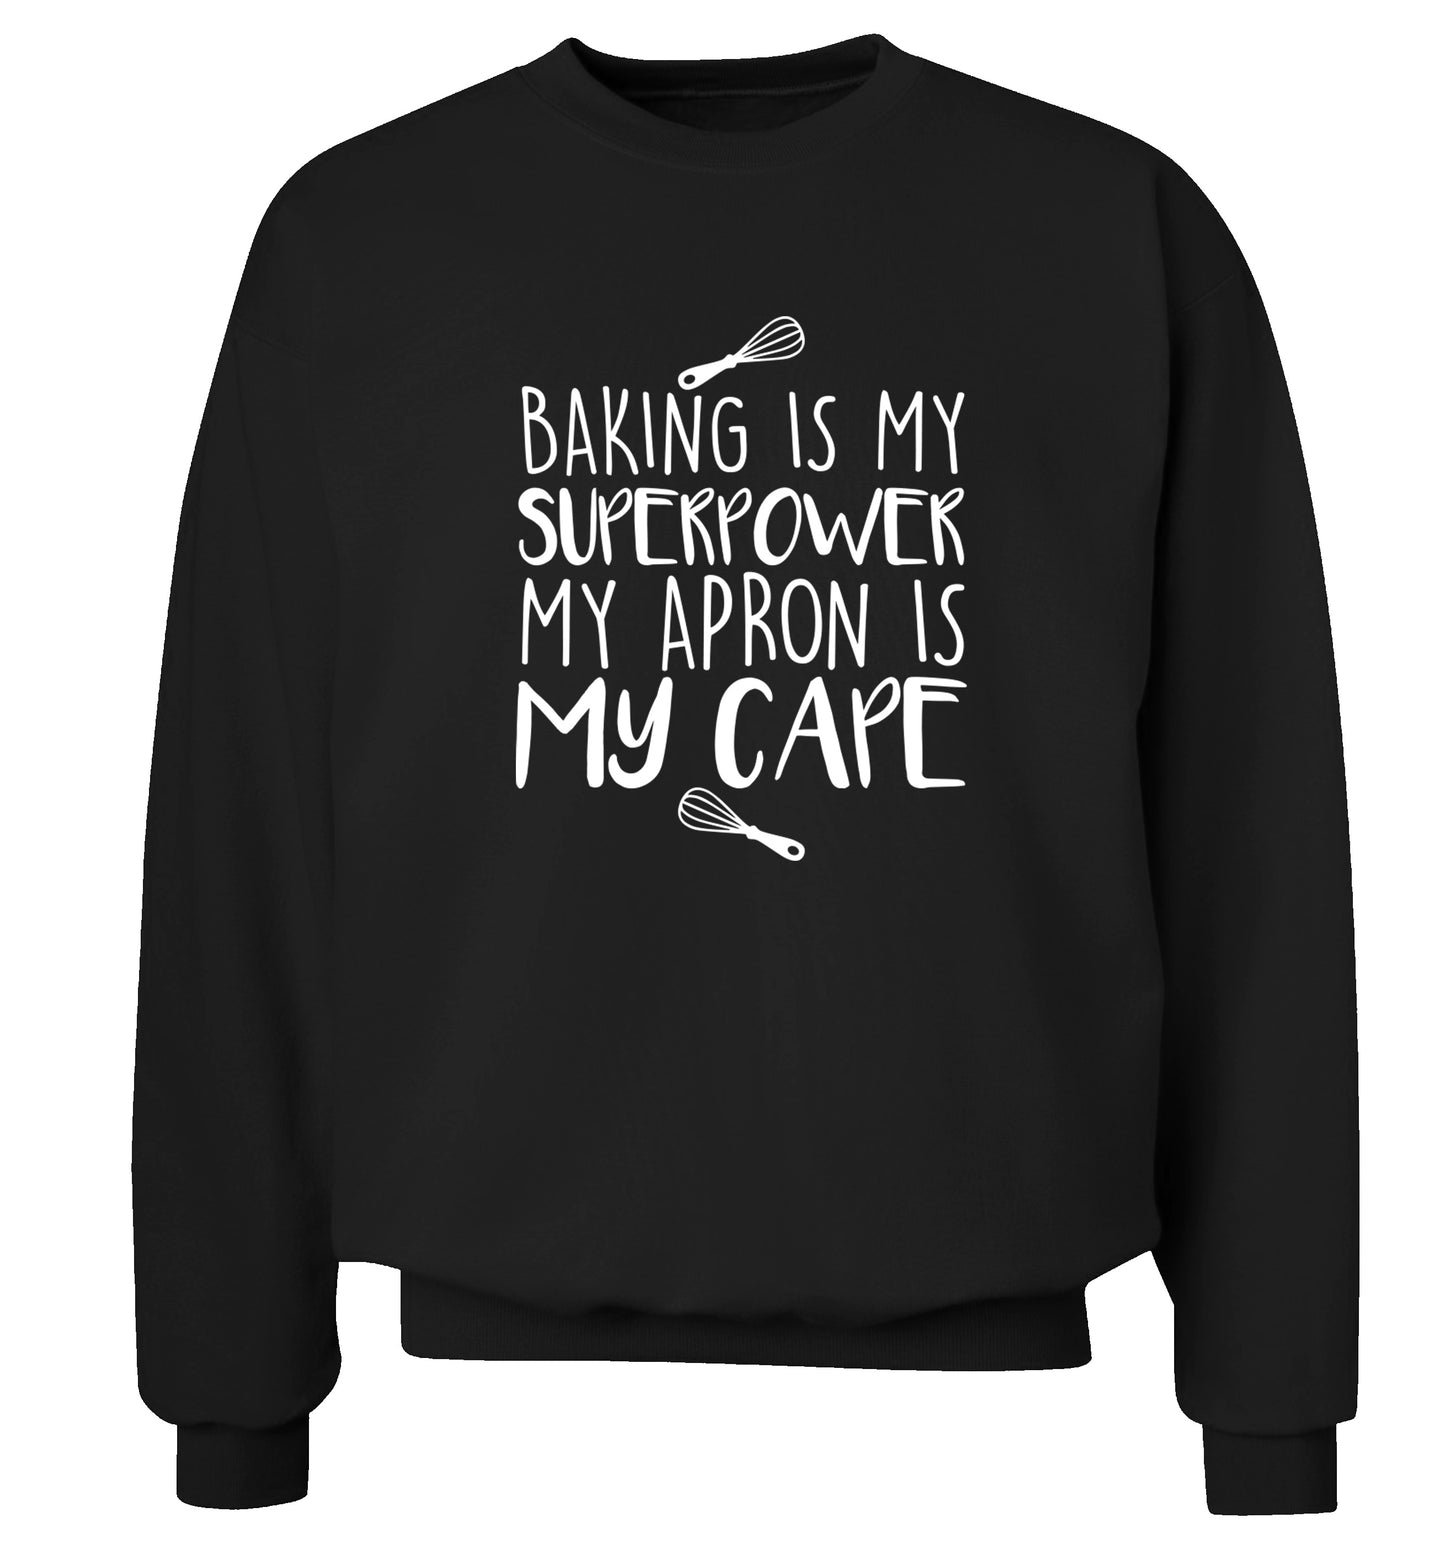 Baking is my superpower my apron is my cape Adult's unisex black Sweater 2XL